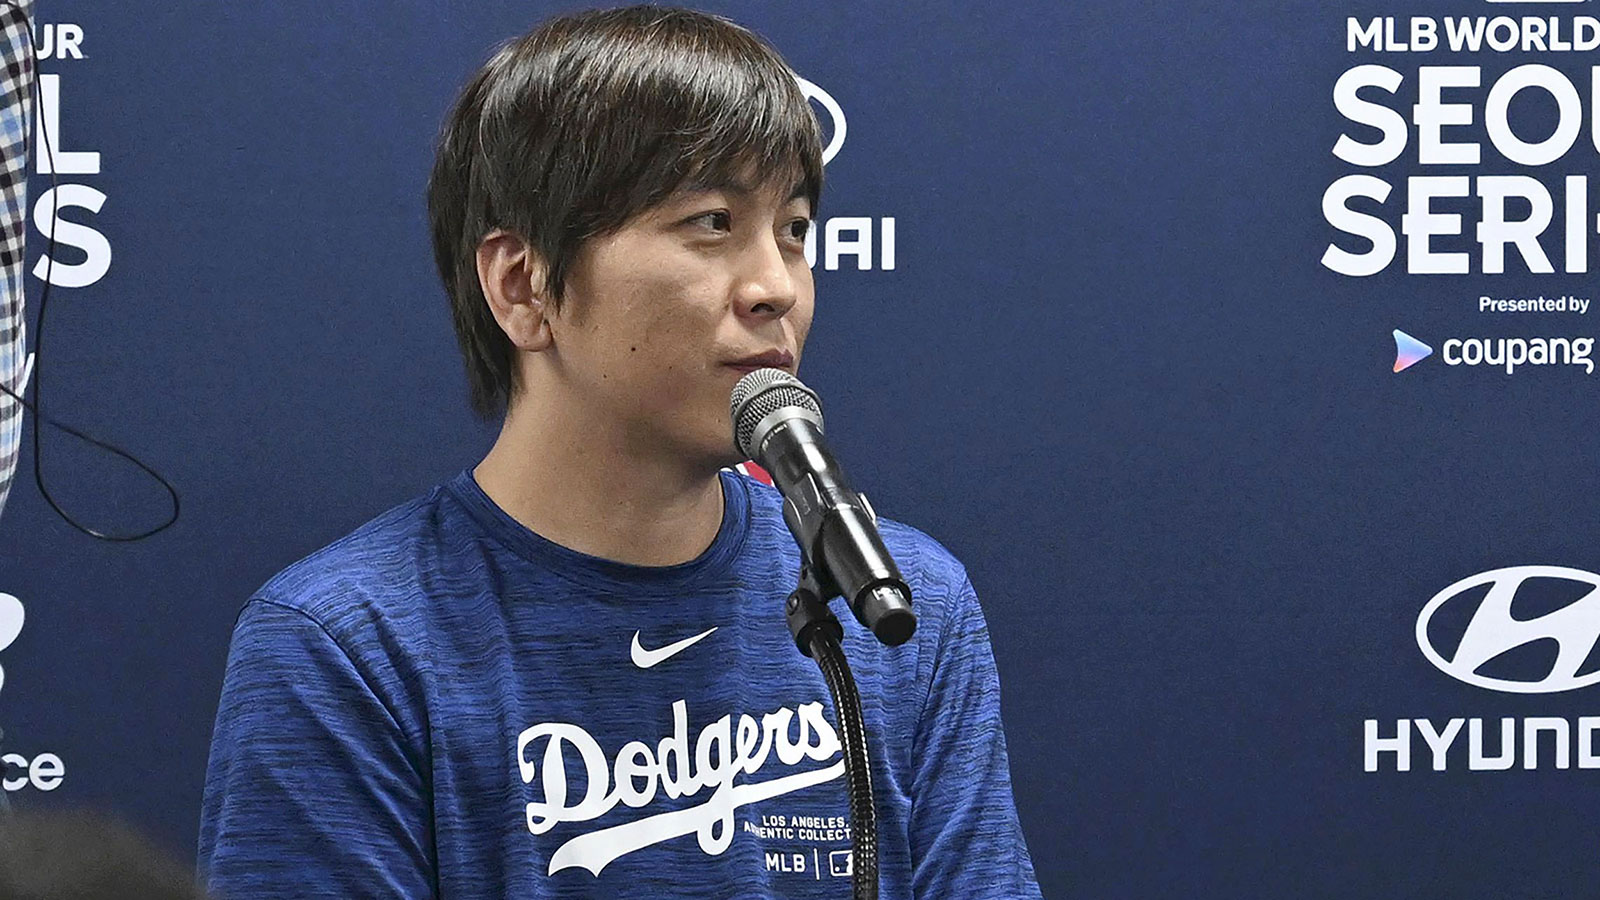 Ippei Mizuhara speaks during a press conference for the MLB opening game against the San Diego Padres in Seoul, South Korea on March 16. 